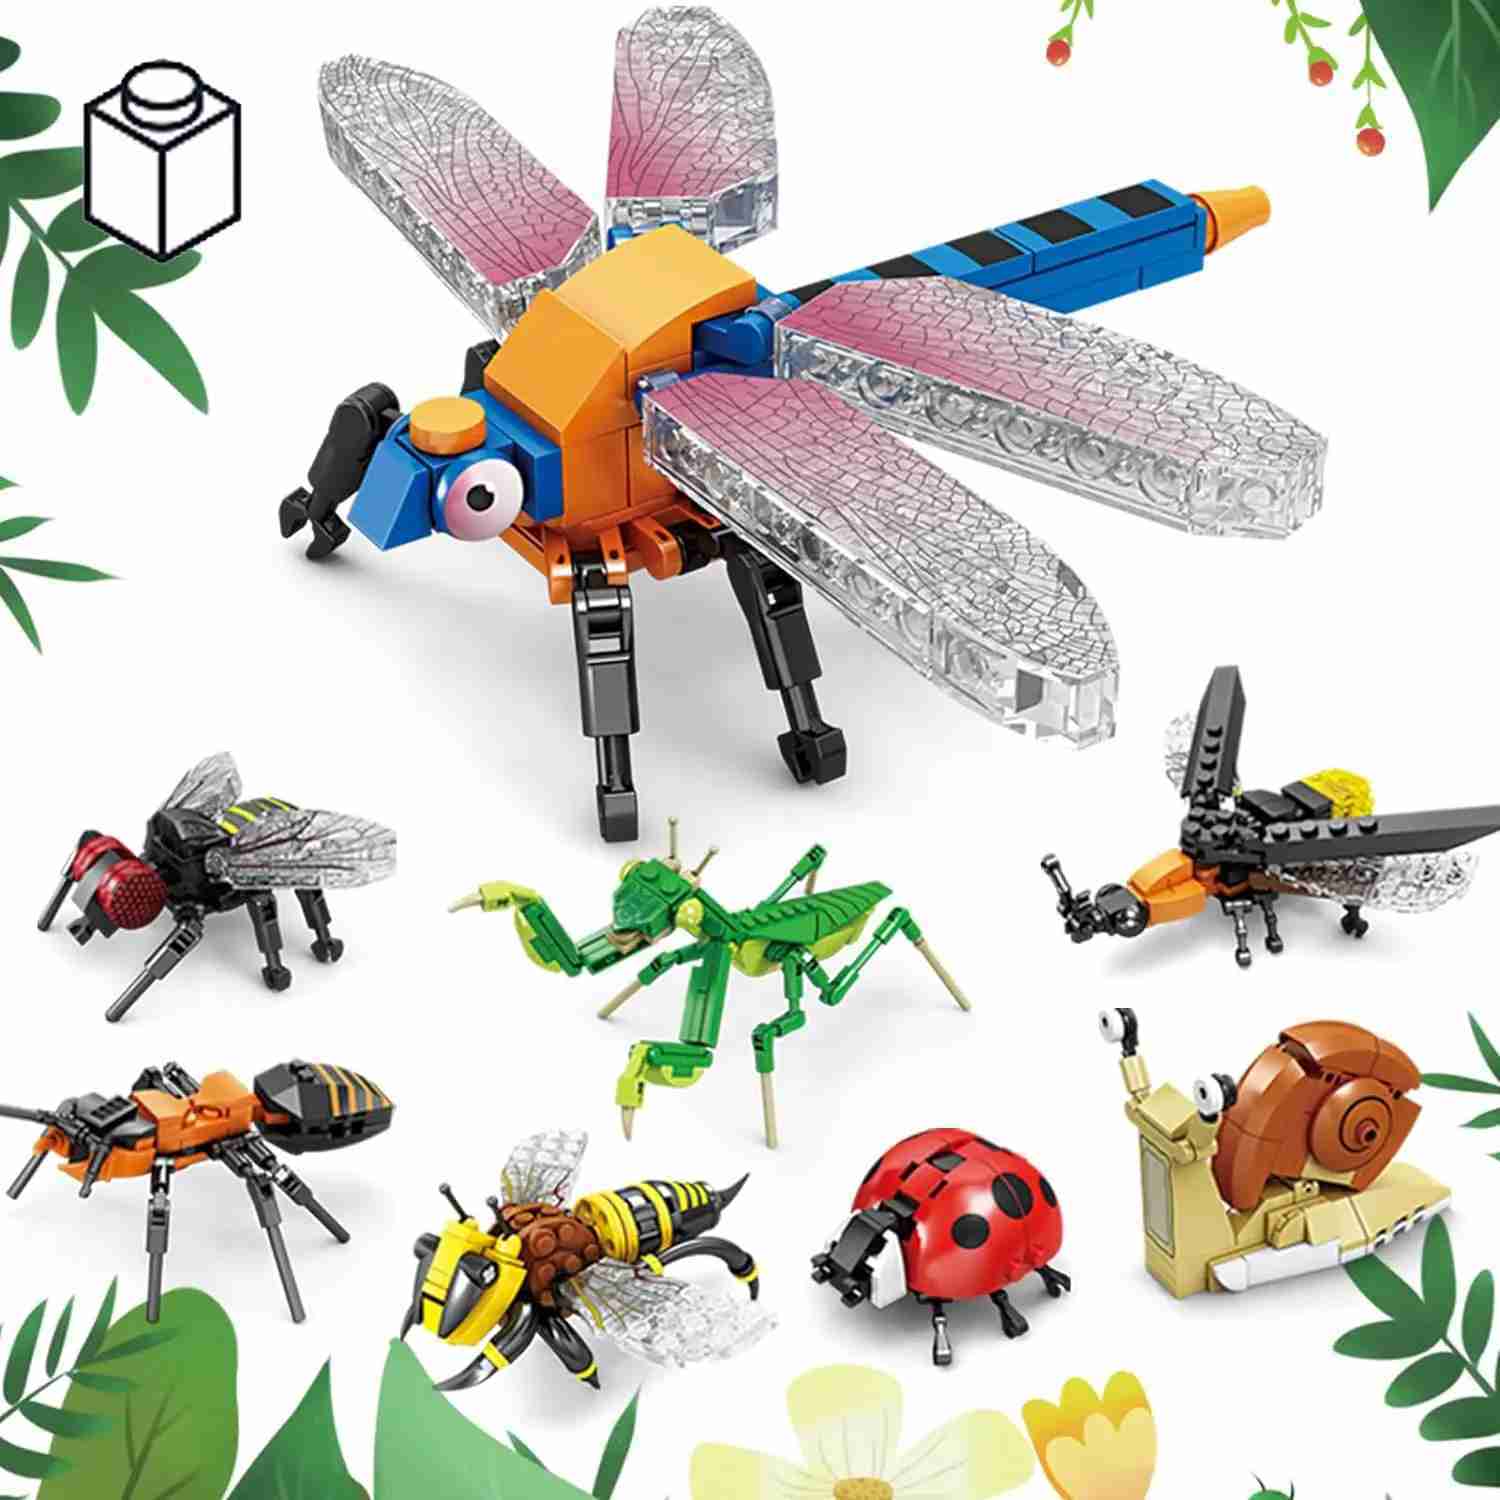 Magnetiska block Insekter och insekter Byggnadsblock Toys Beetle Mantis Bee Snail Blocks Insect Set Childrens Brain Games Puzzle Toys Animal Gifts WX5.17